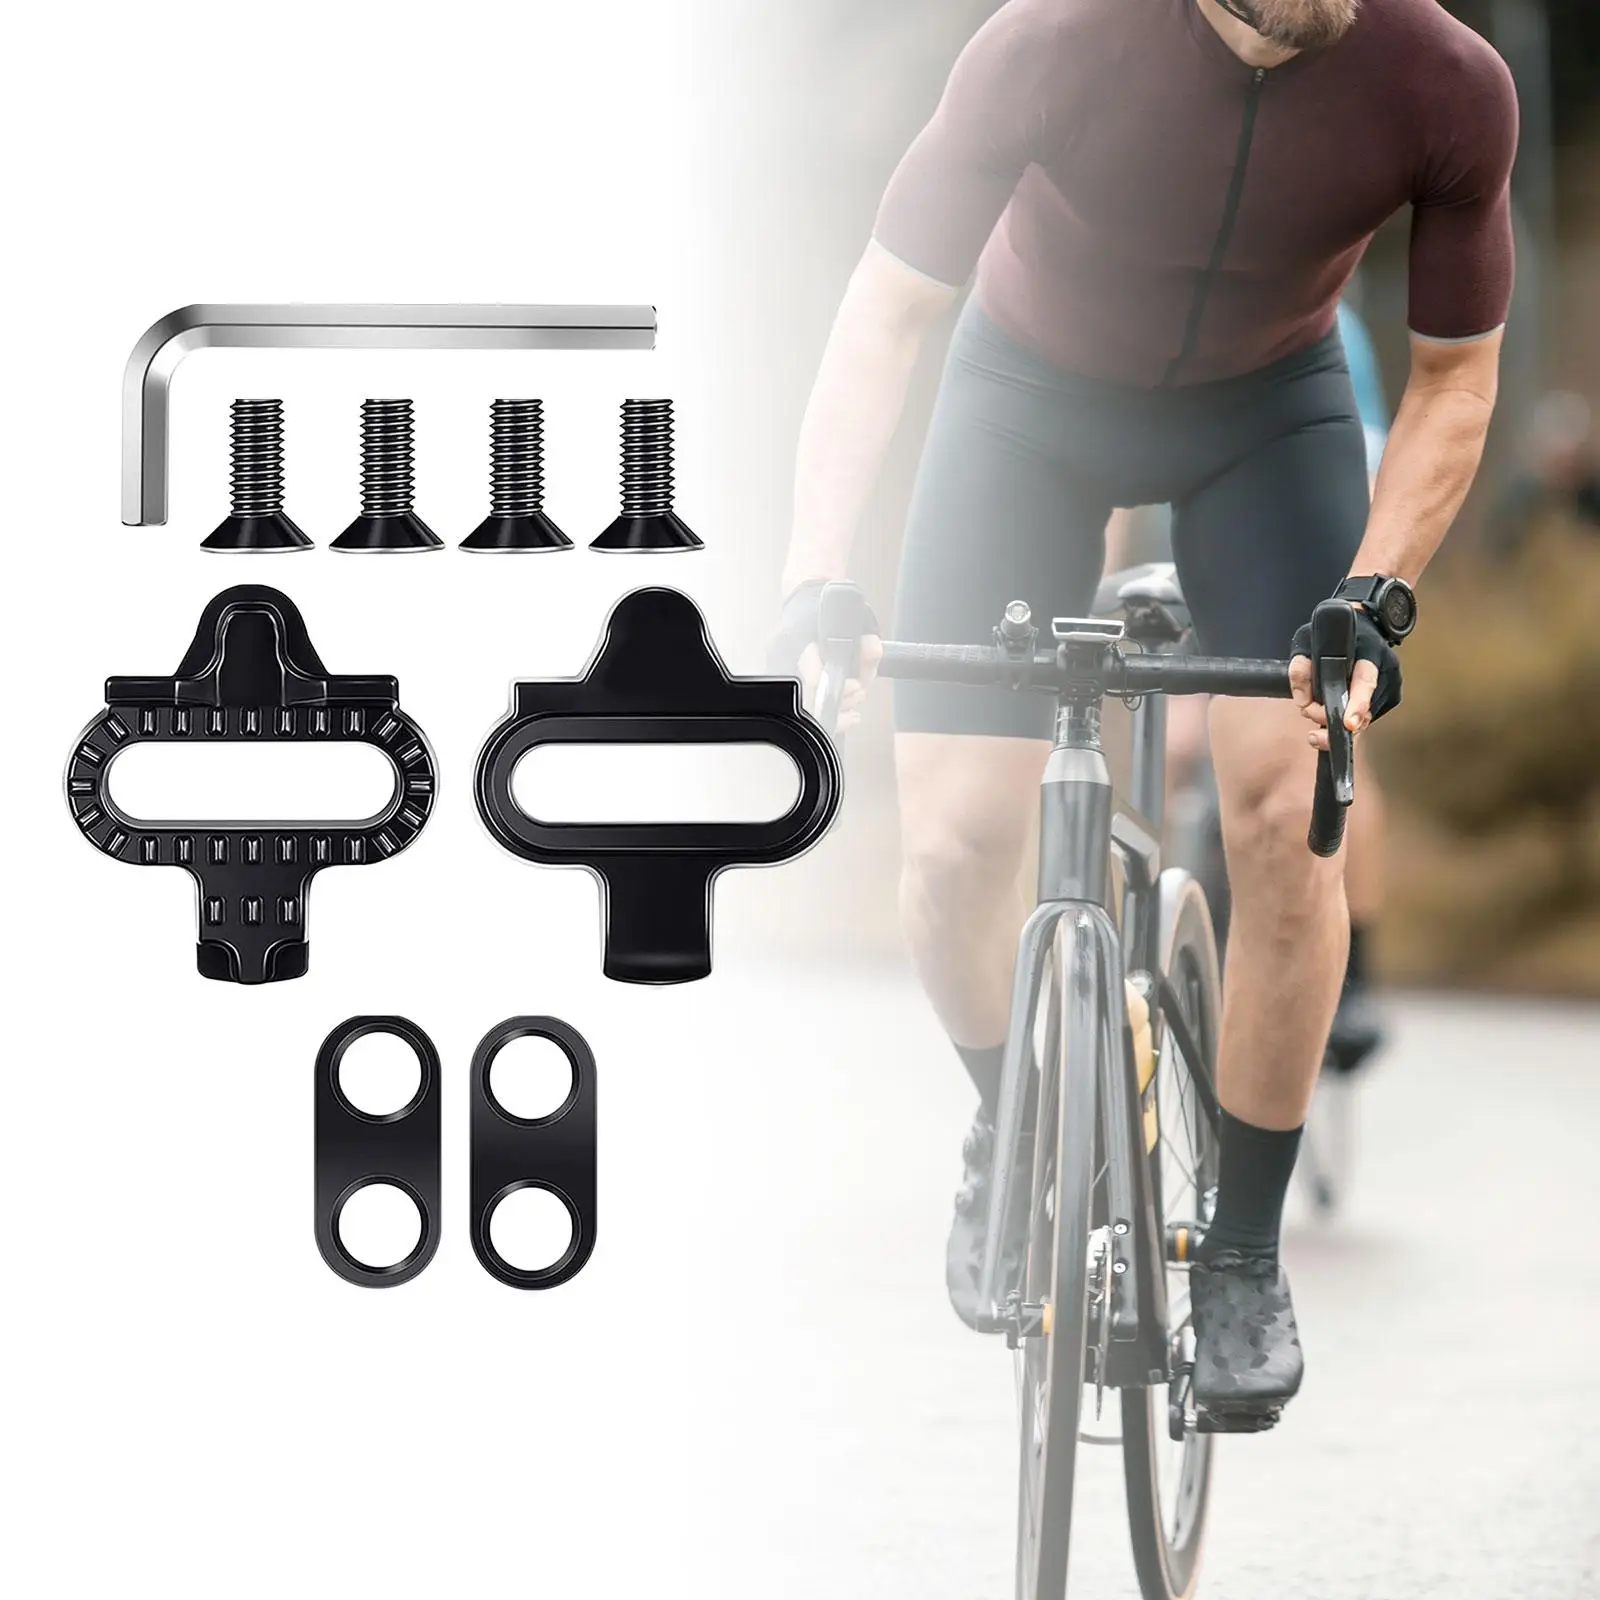 Bike Shoes Cleats Locking Protect Feet/ankles/Legs Easy Installation Cycling Parts Practical Universal Bicycle Pedals Cleats